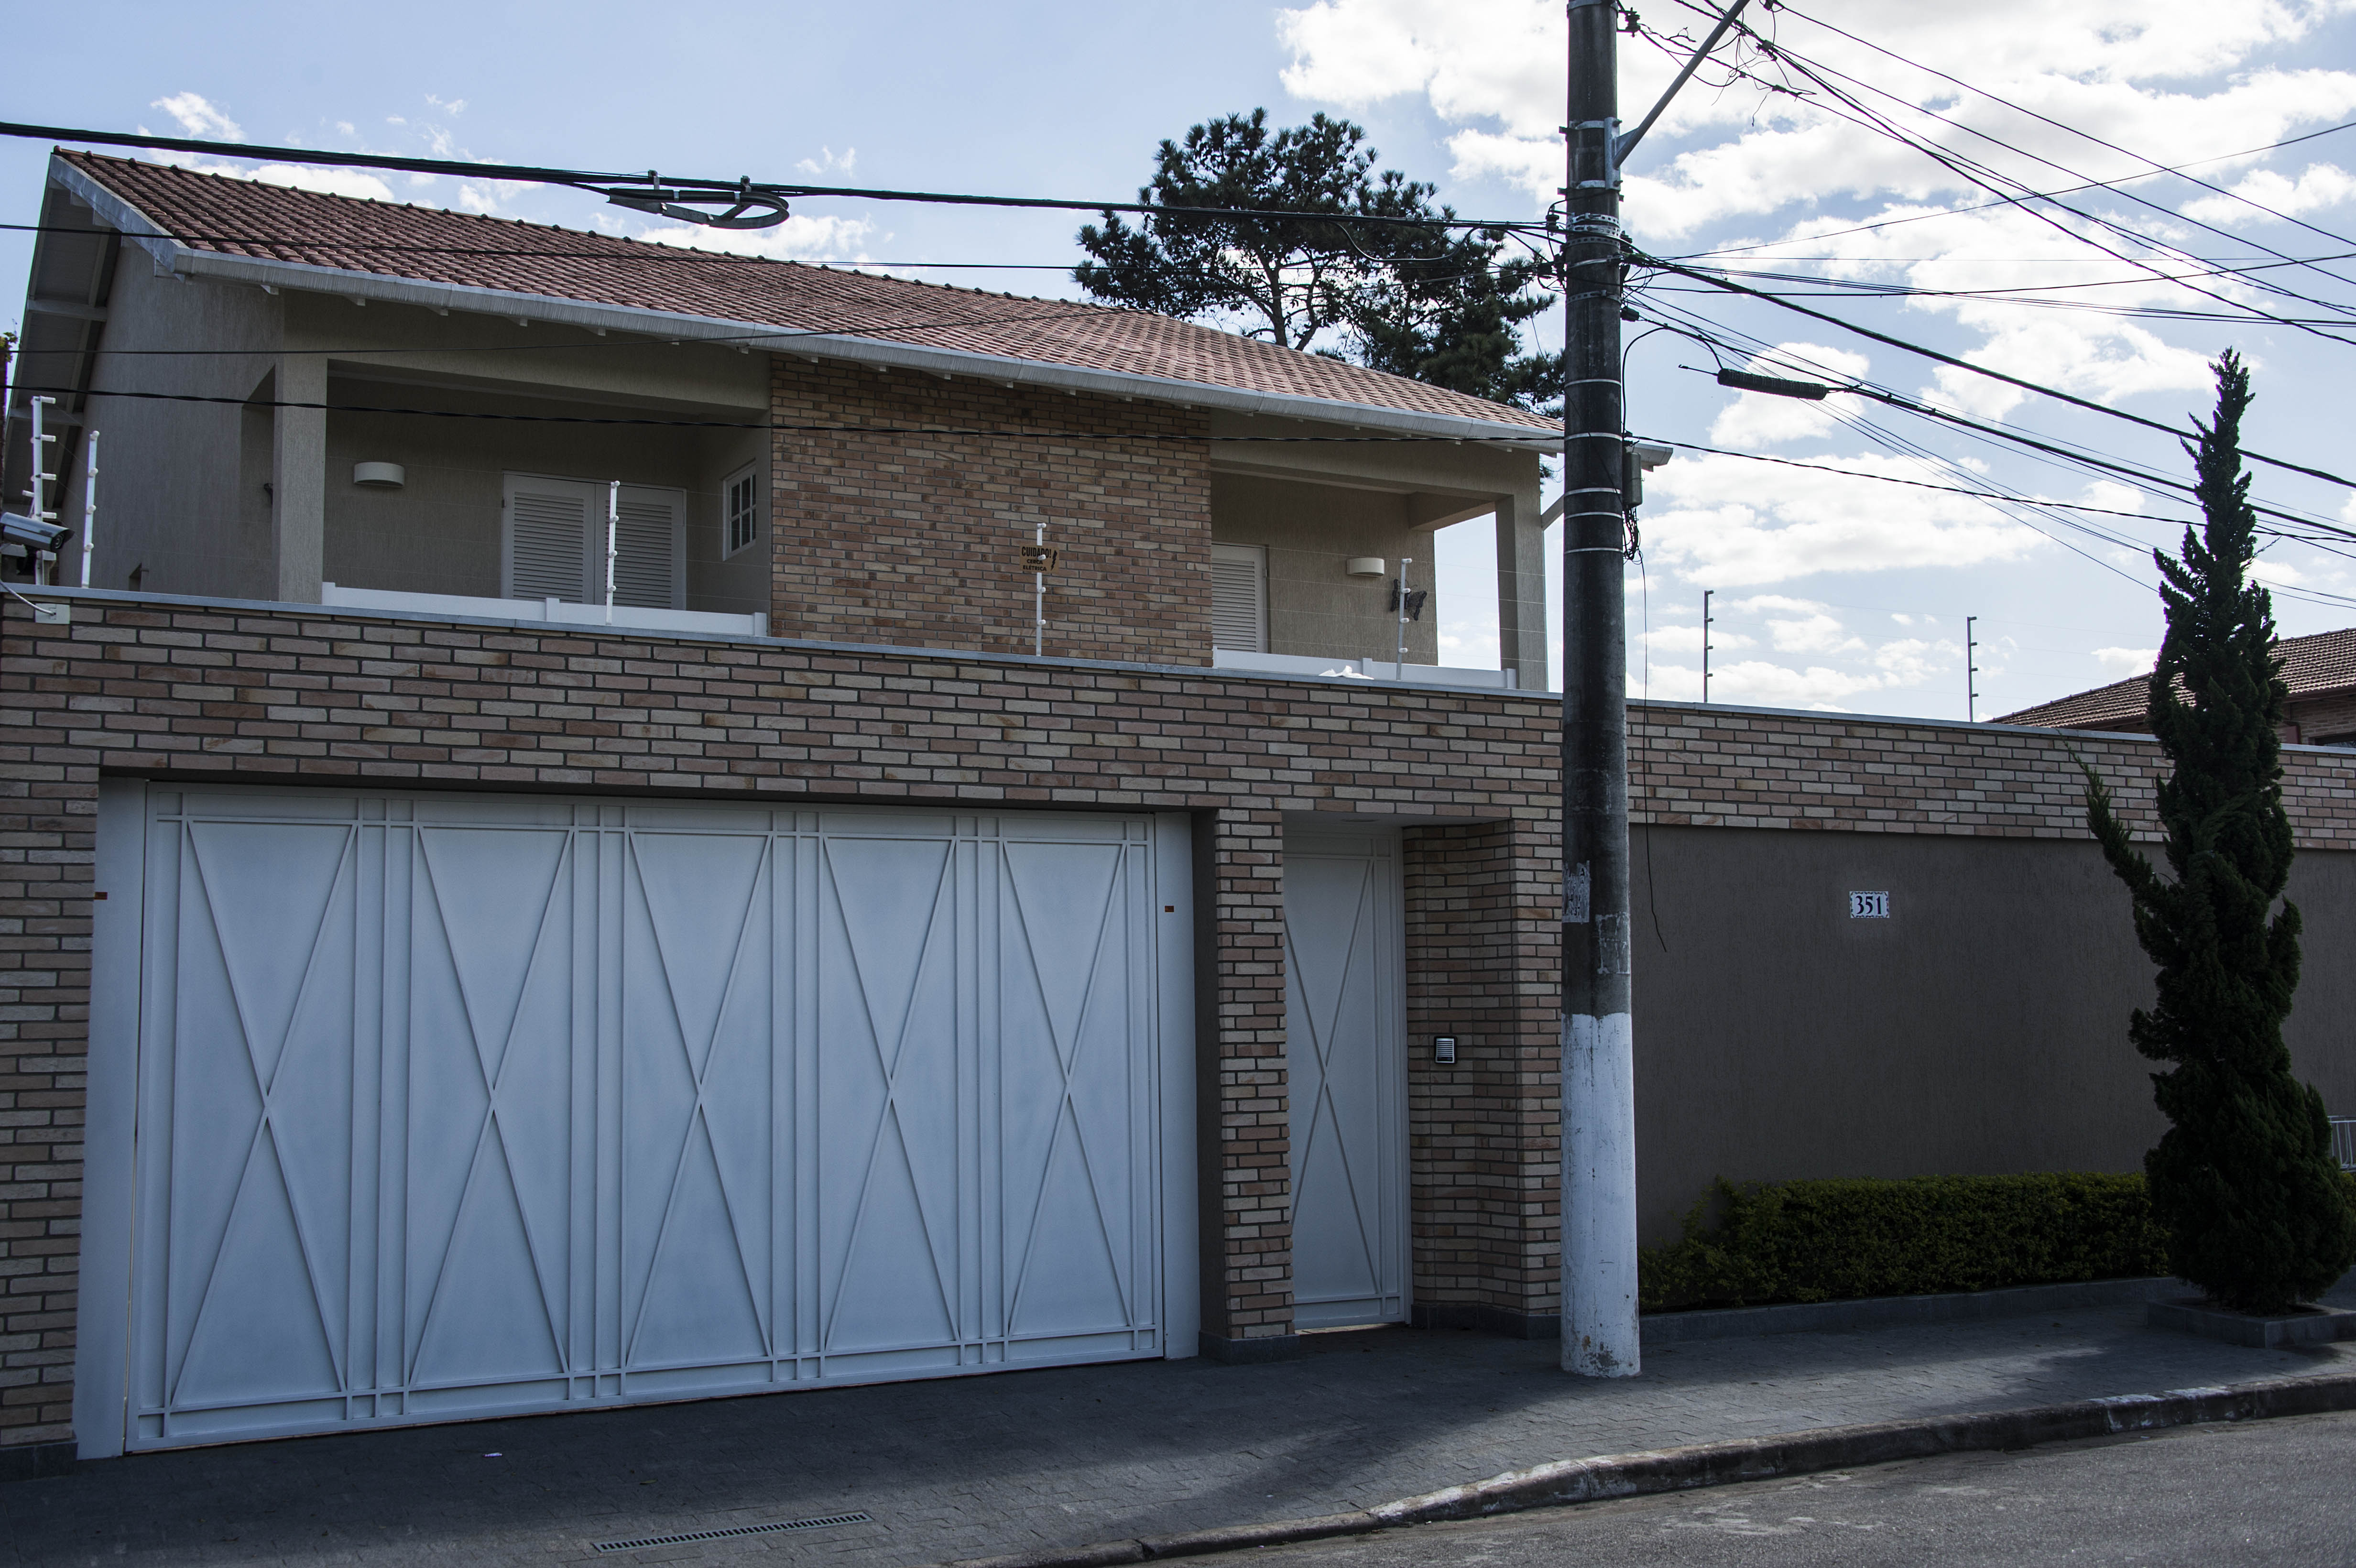 Schunck's home in Interlagos, the Sao Paulo neighborhood that hosts the Brazilian circuit of the F1 Grand Prix, TV Globo reported. According to Globo, the kidnappers are already in contact with the victim's family. (Getty)